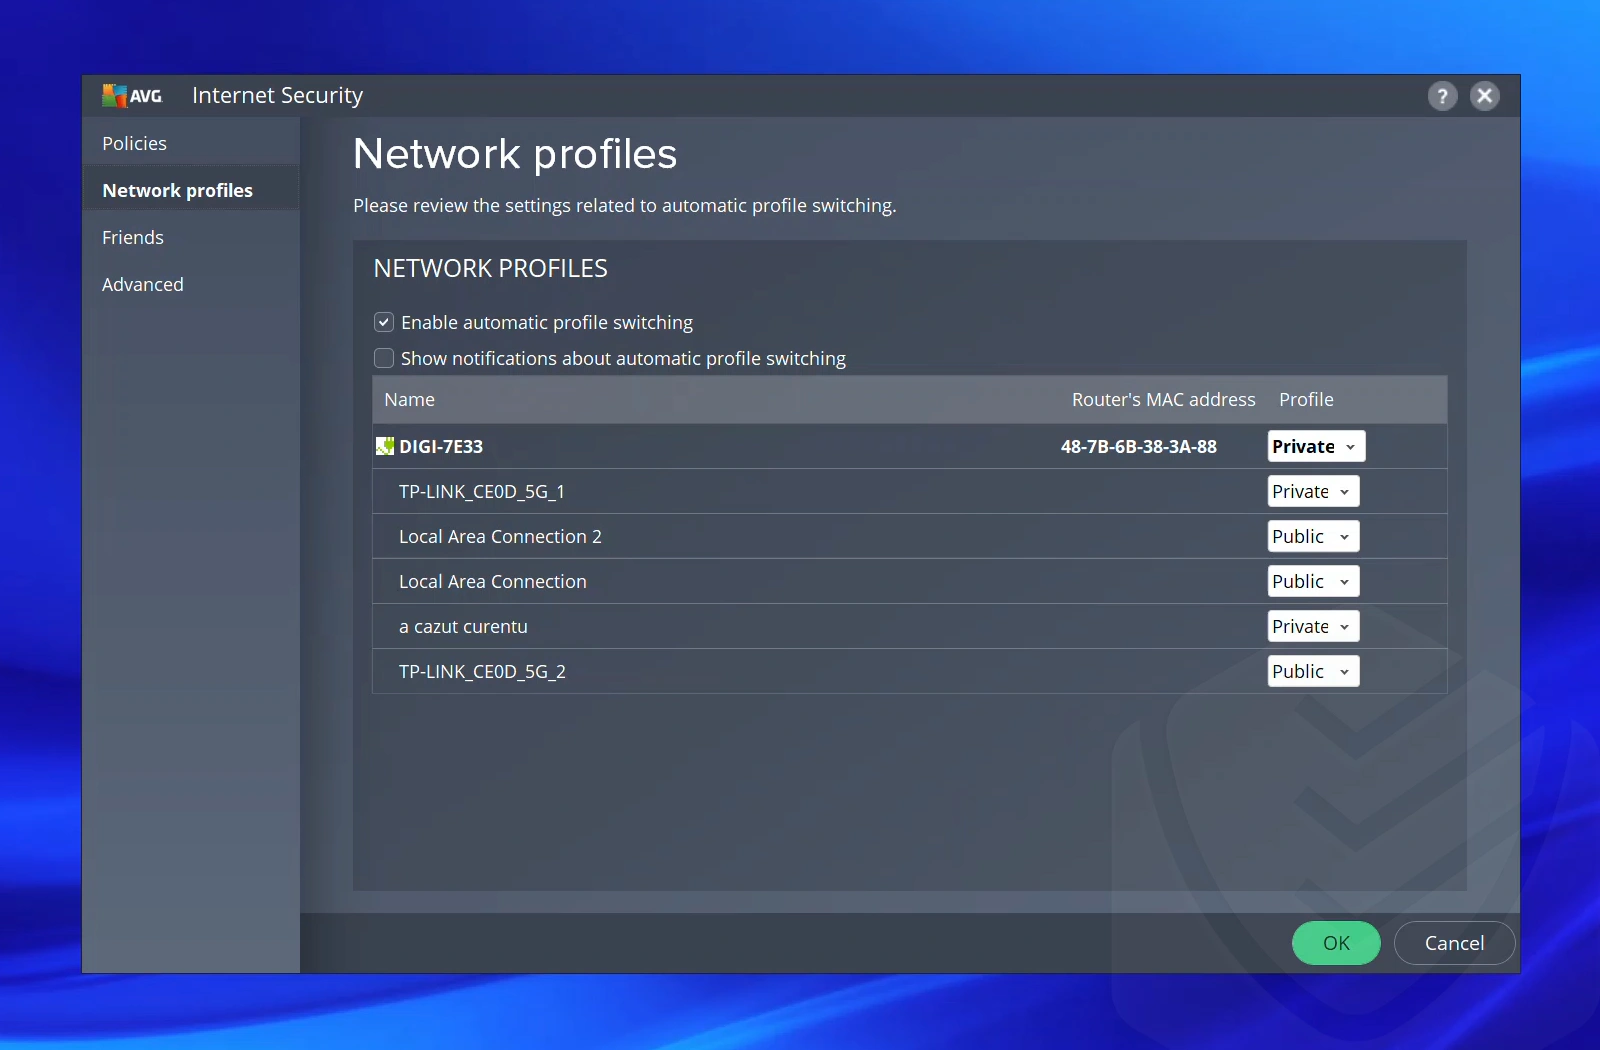 Changing the network profiles